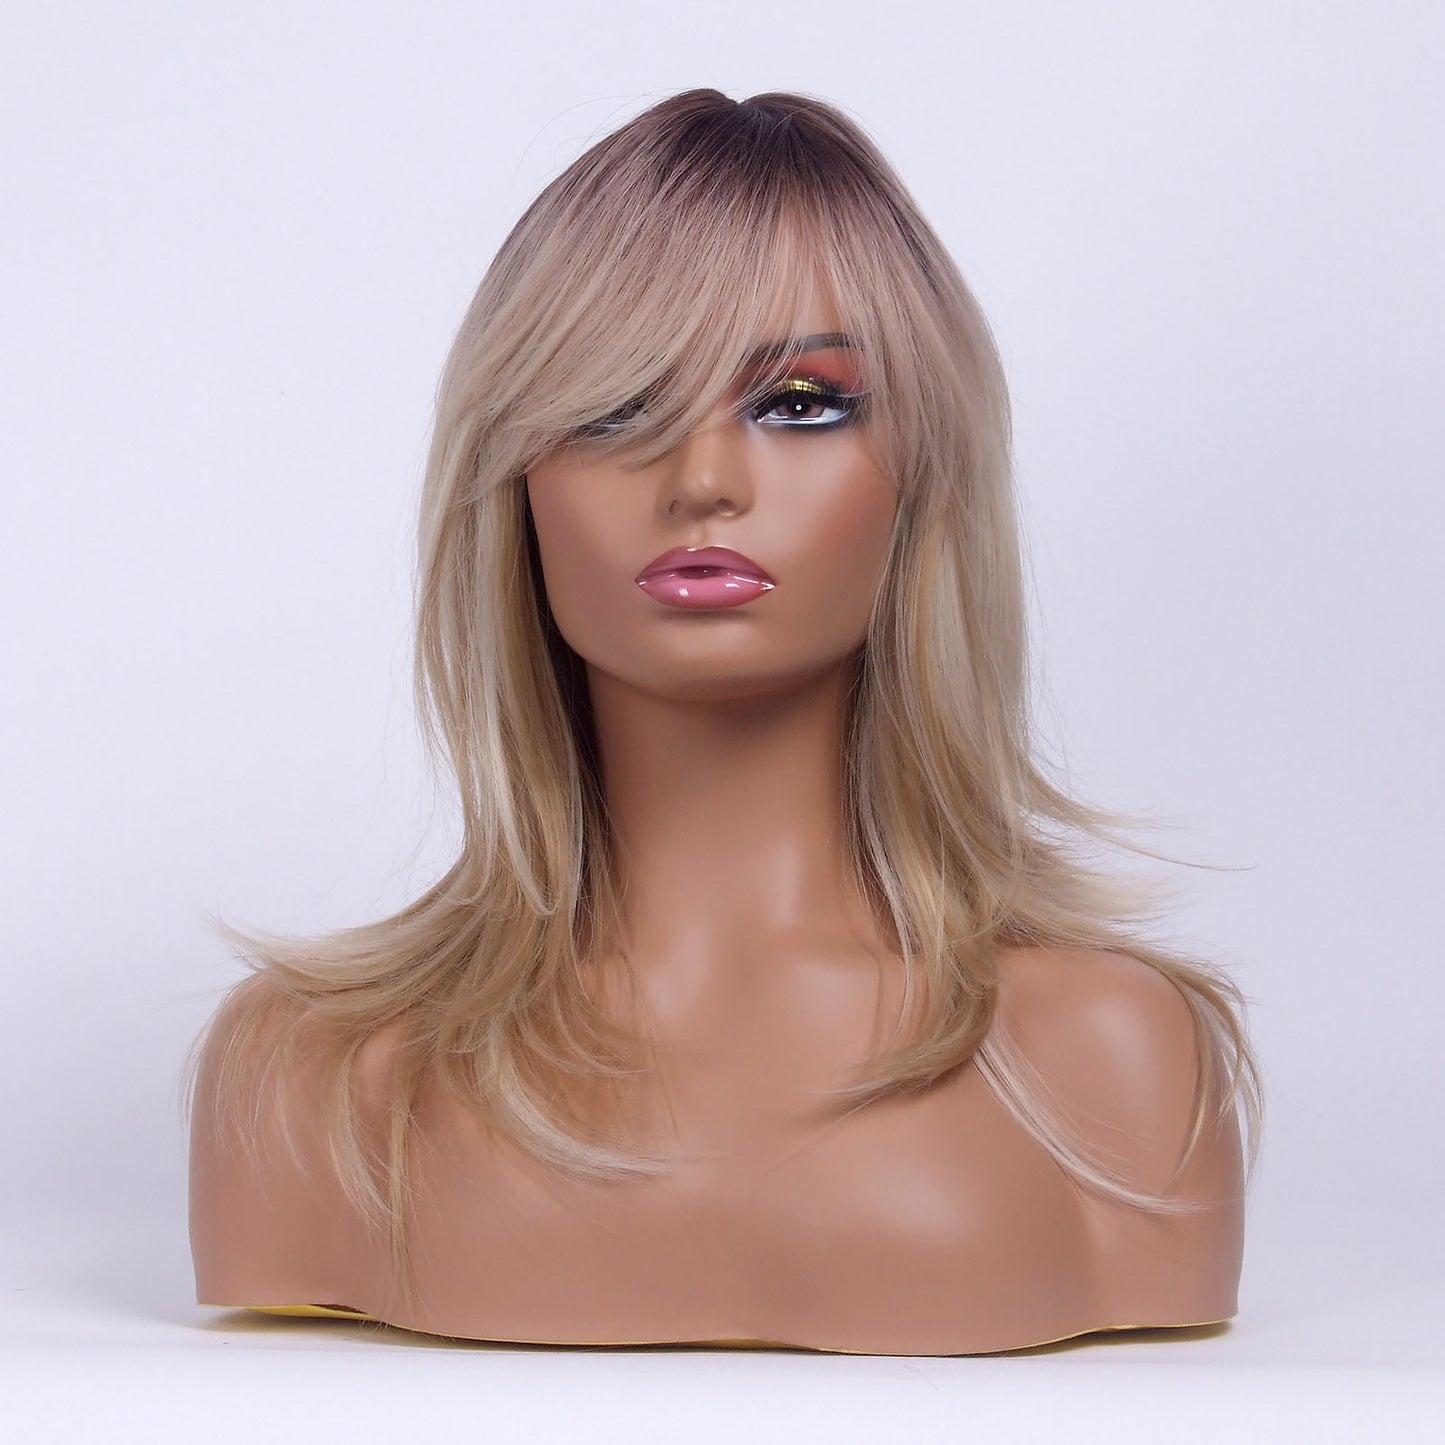 LINGDORA Ombre Blonde Shoulder-Length Wig With Bangs for White Women Natural Looking